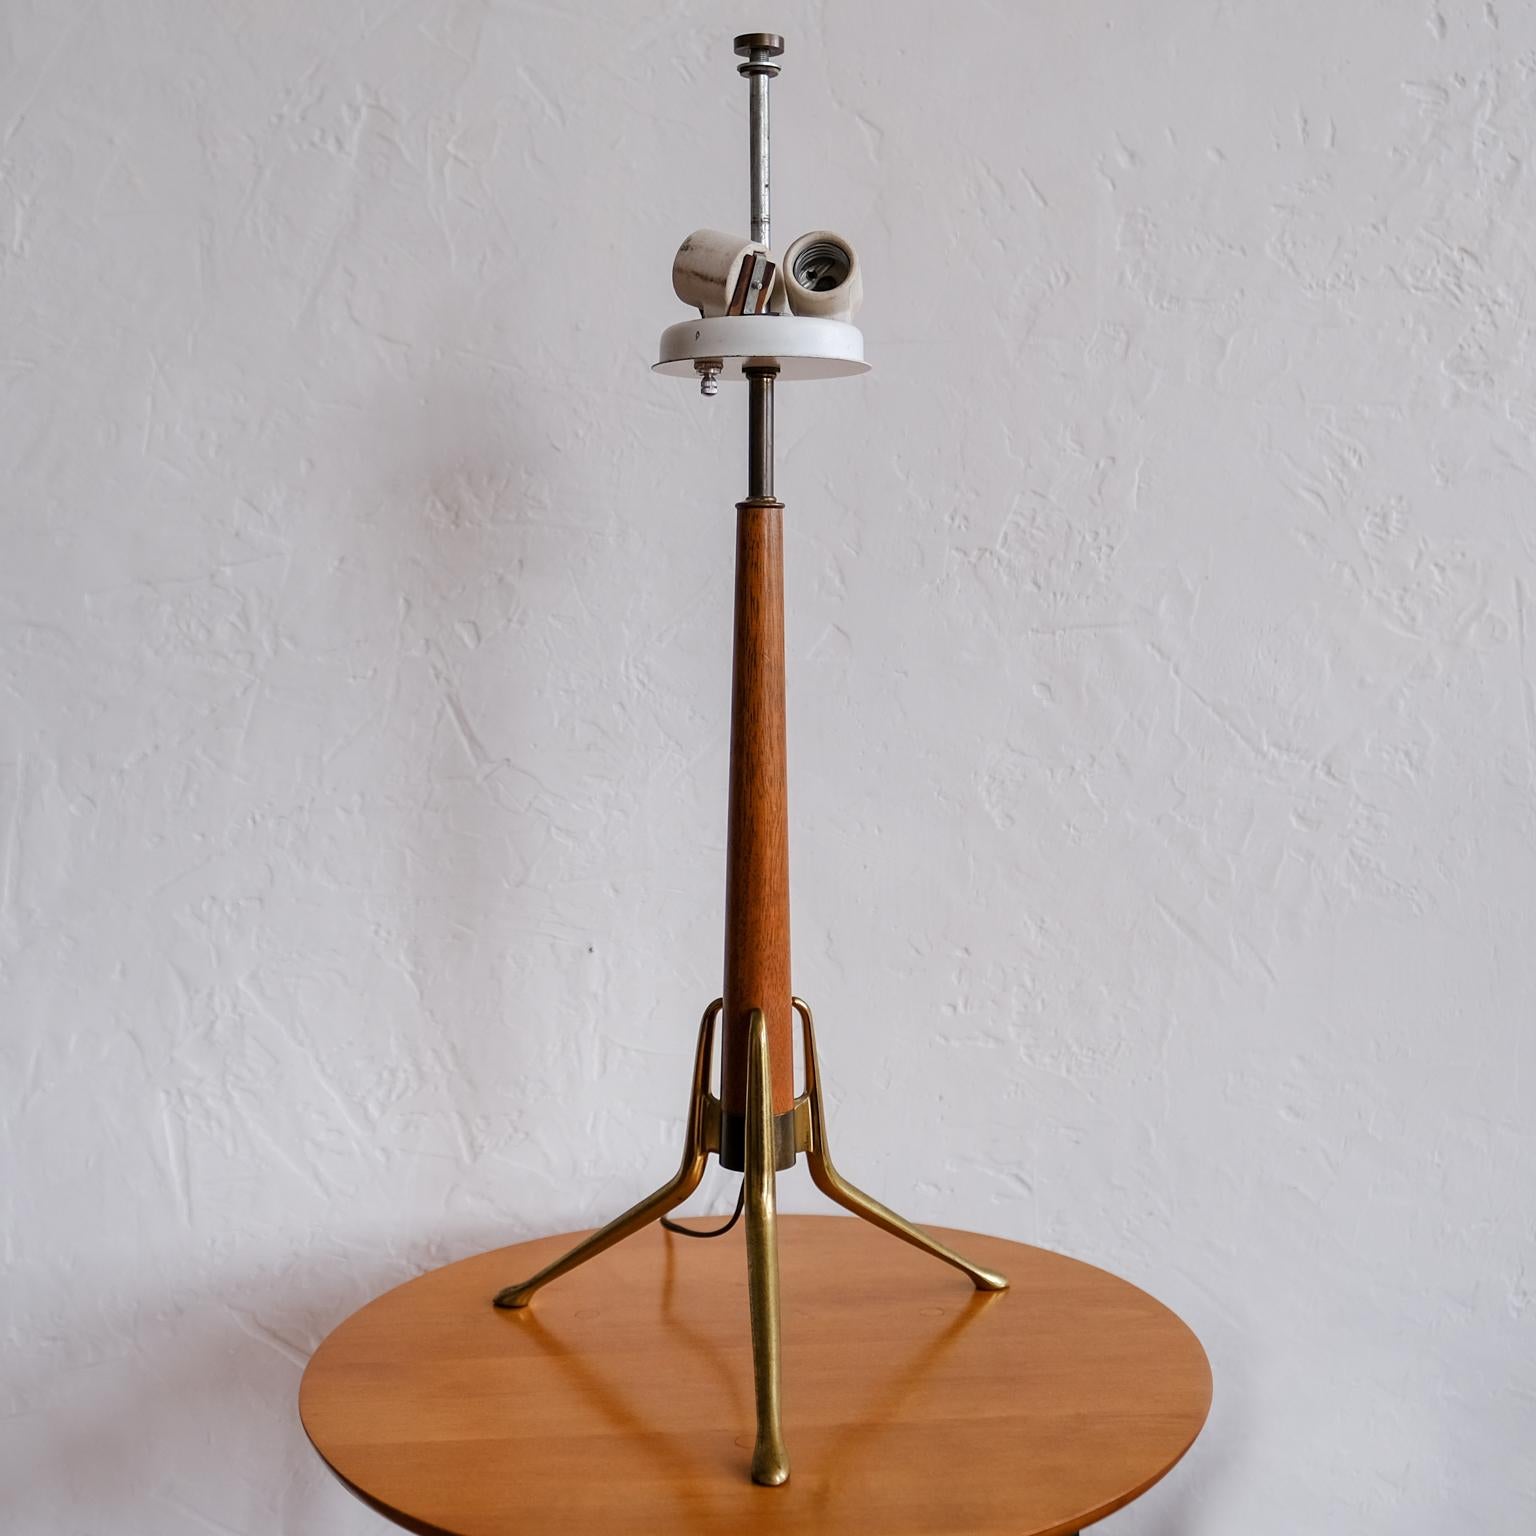 Brass and walnut tripod table Lamp by Gerald Thurston for Lightolier, USA, 1950s

Shade is for display purposes and is not included.